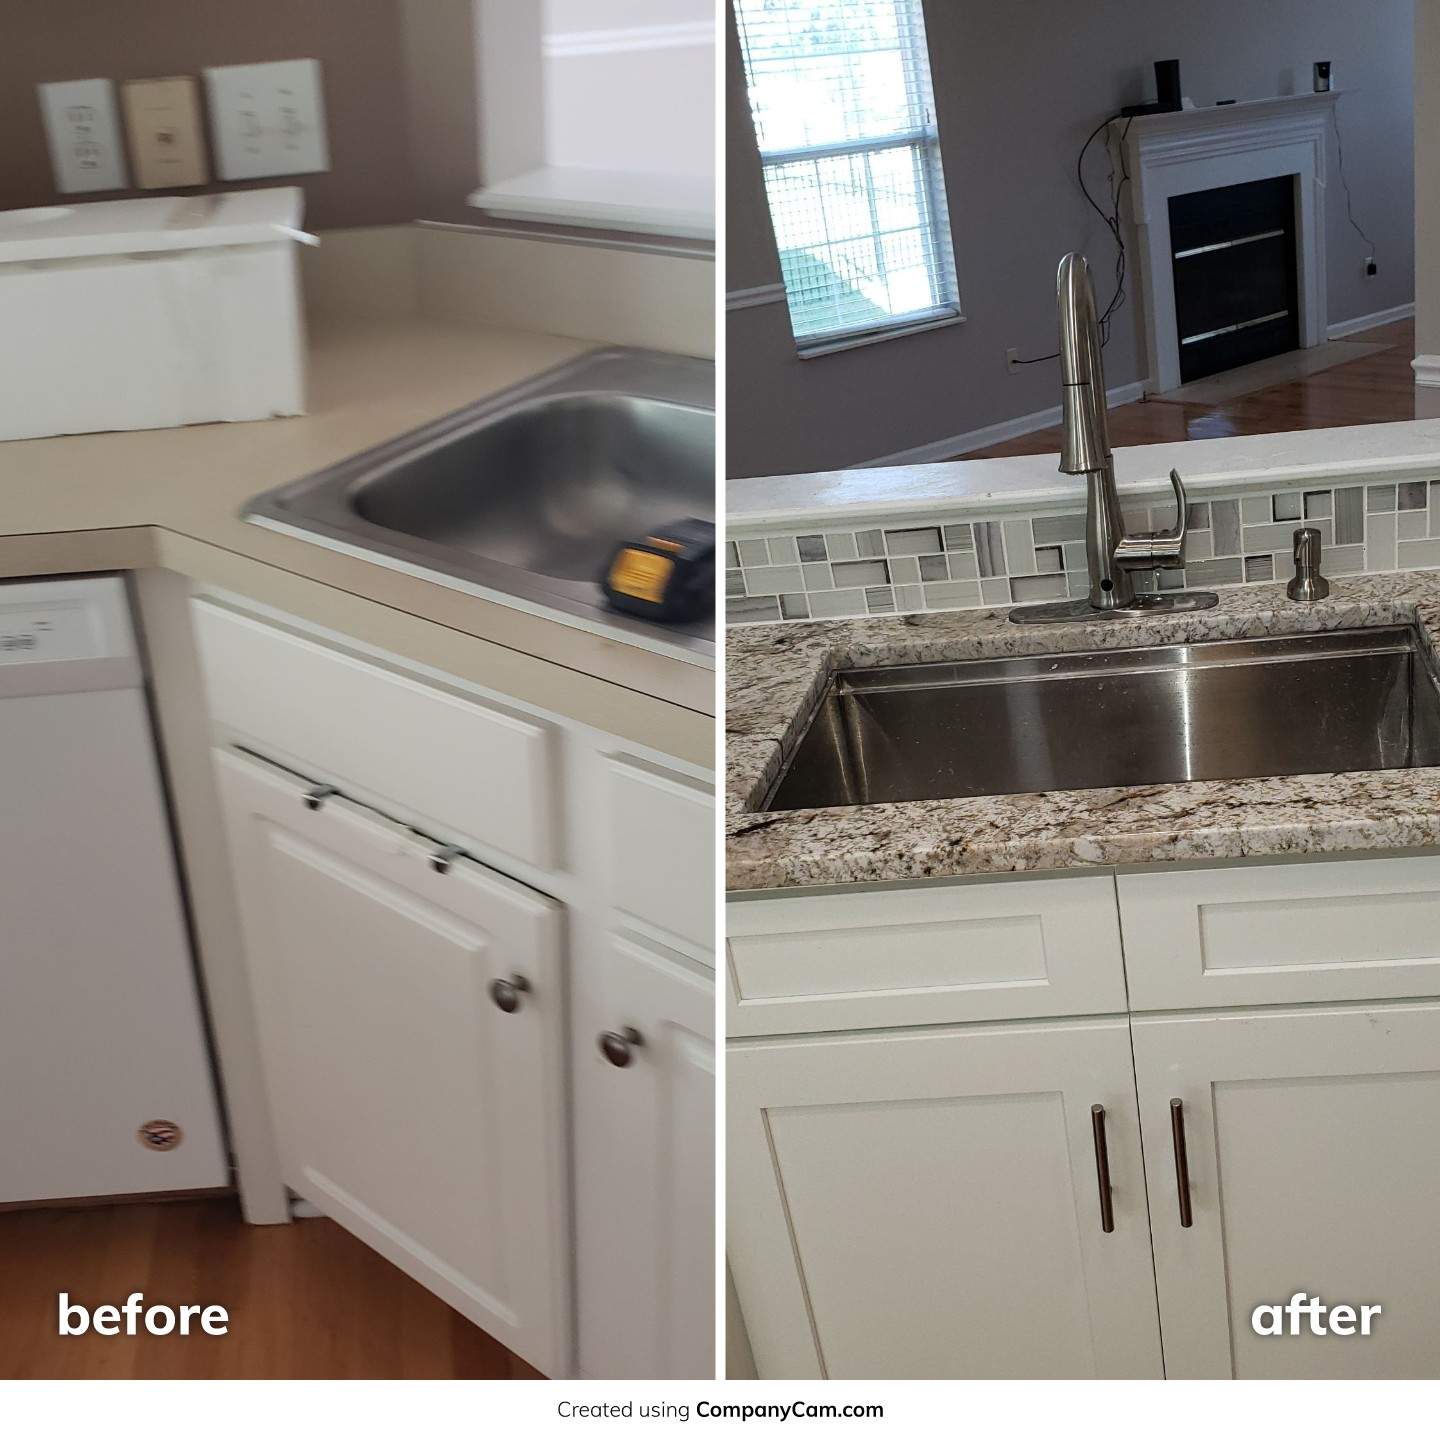 A before and after photo of a kitchen sink